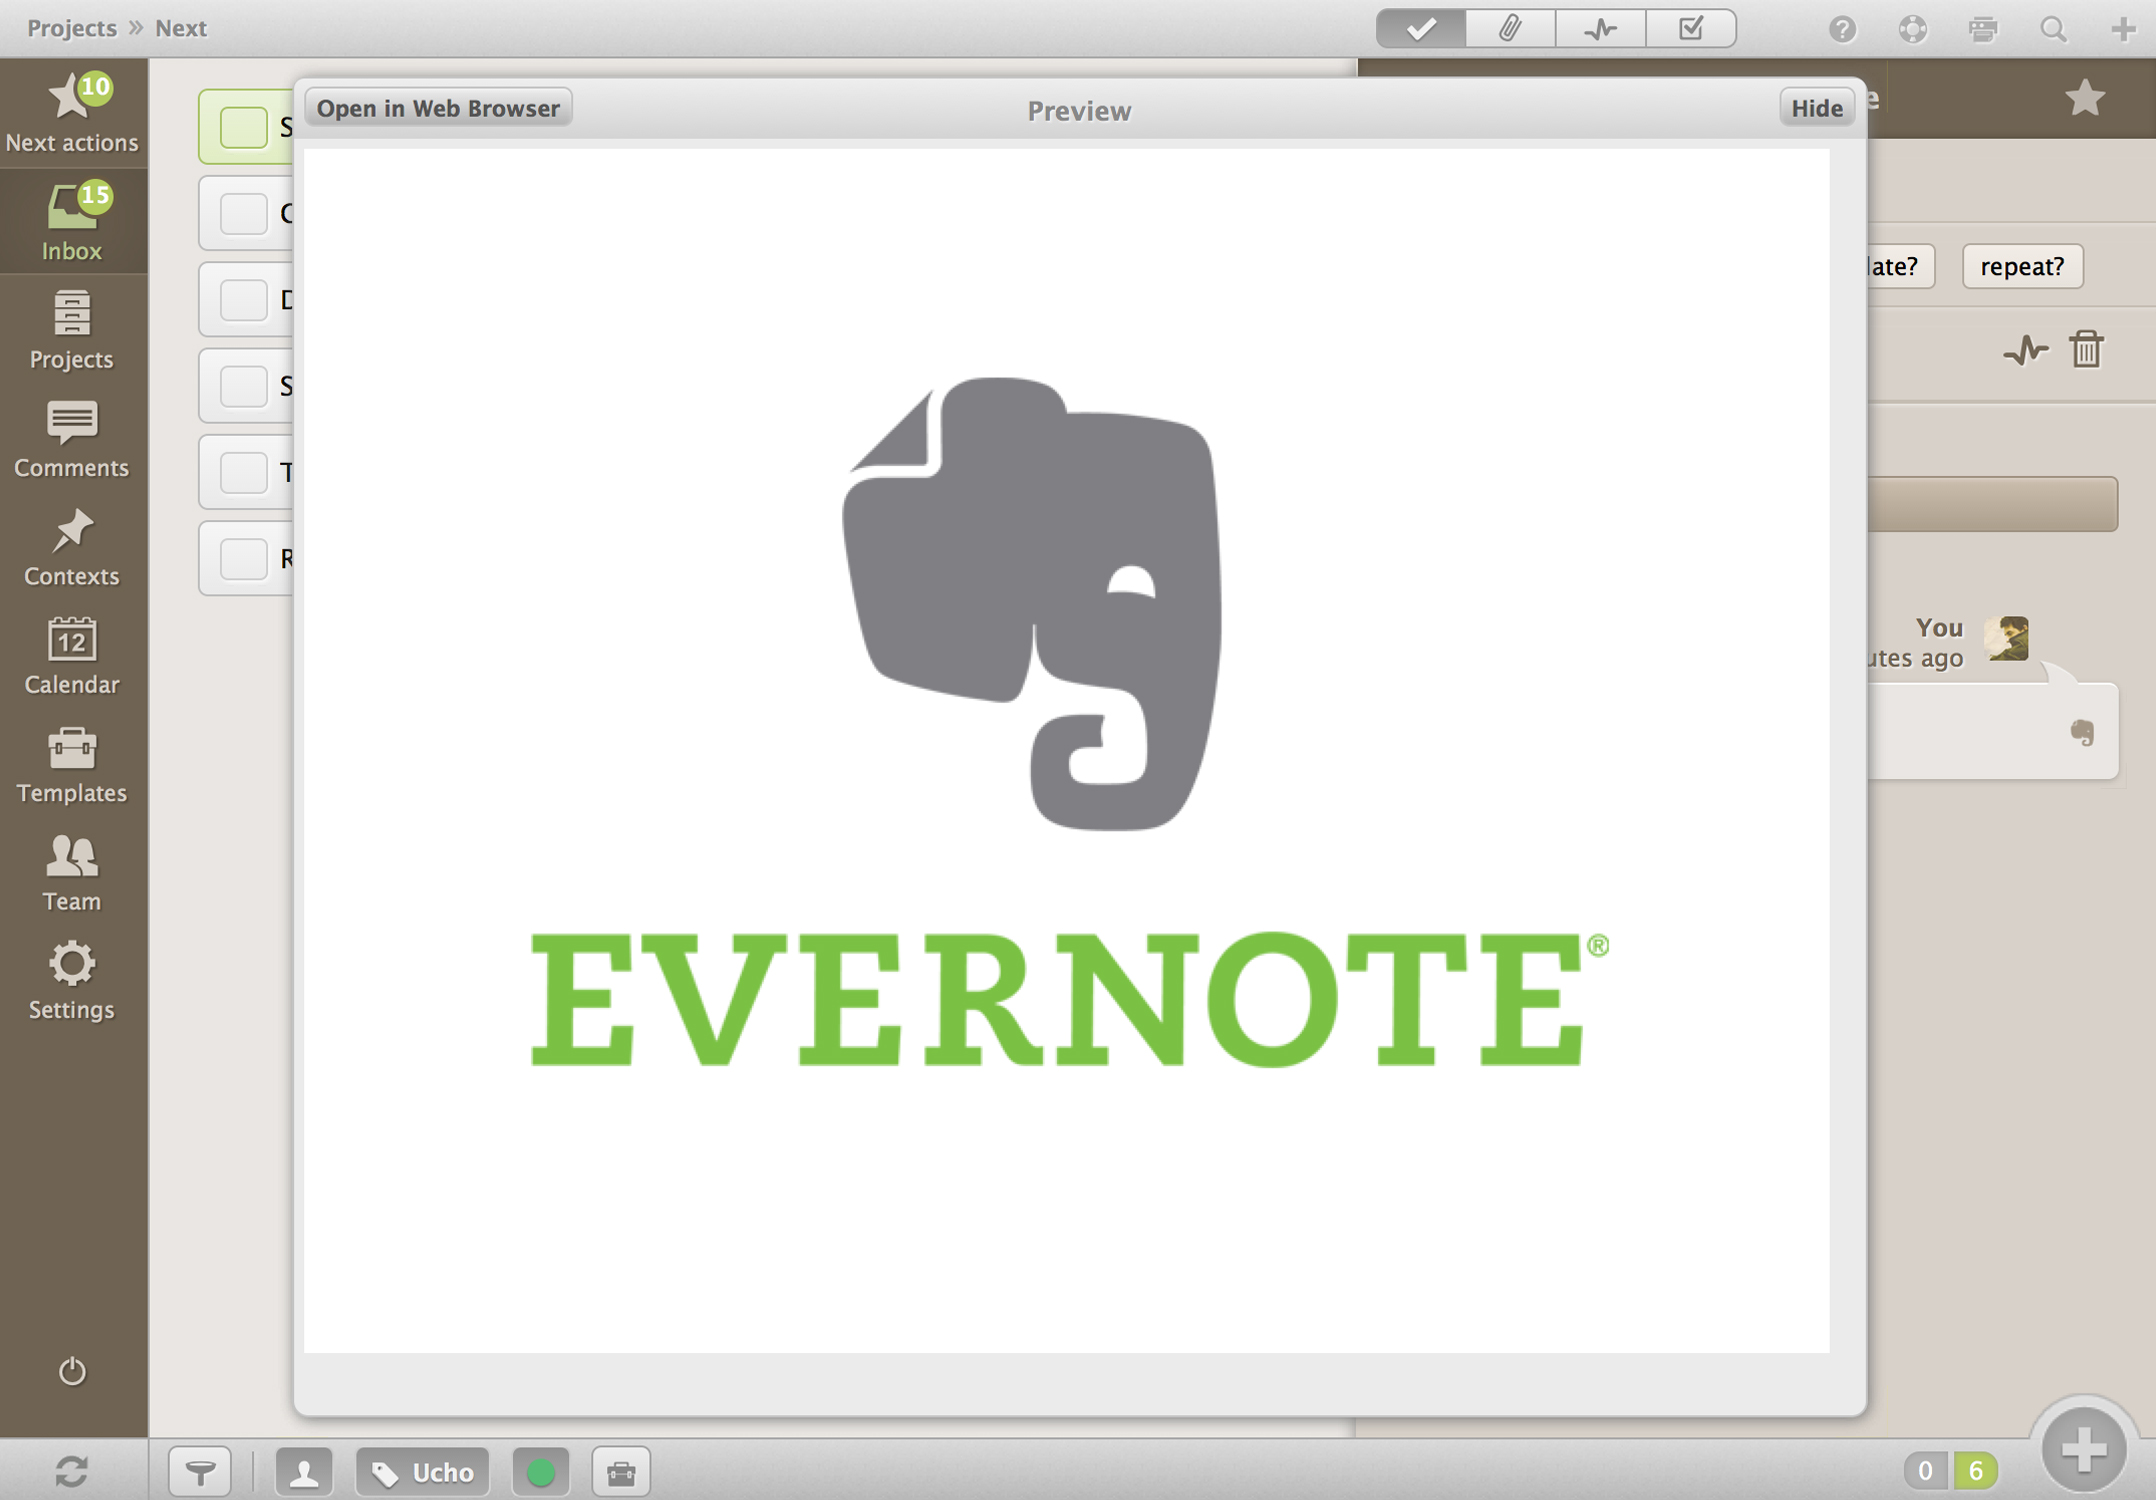 evernote support forum web clipper androied